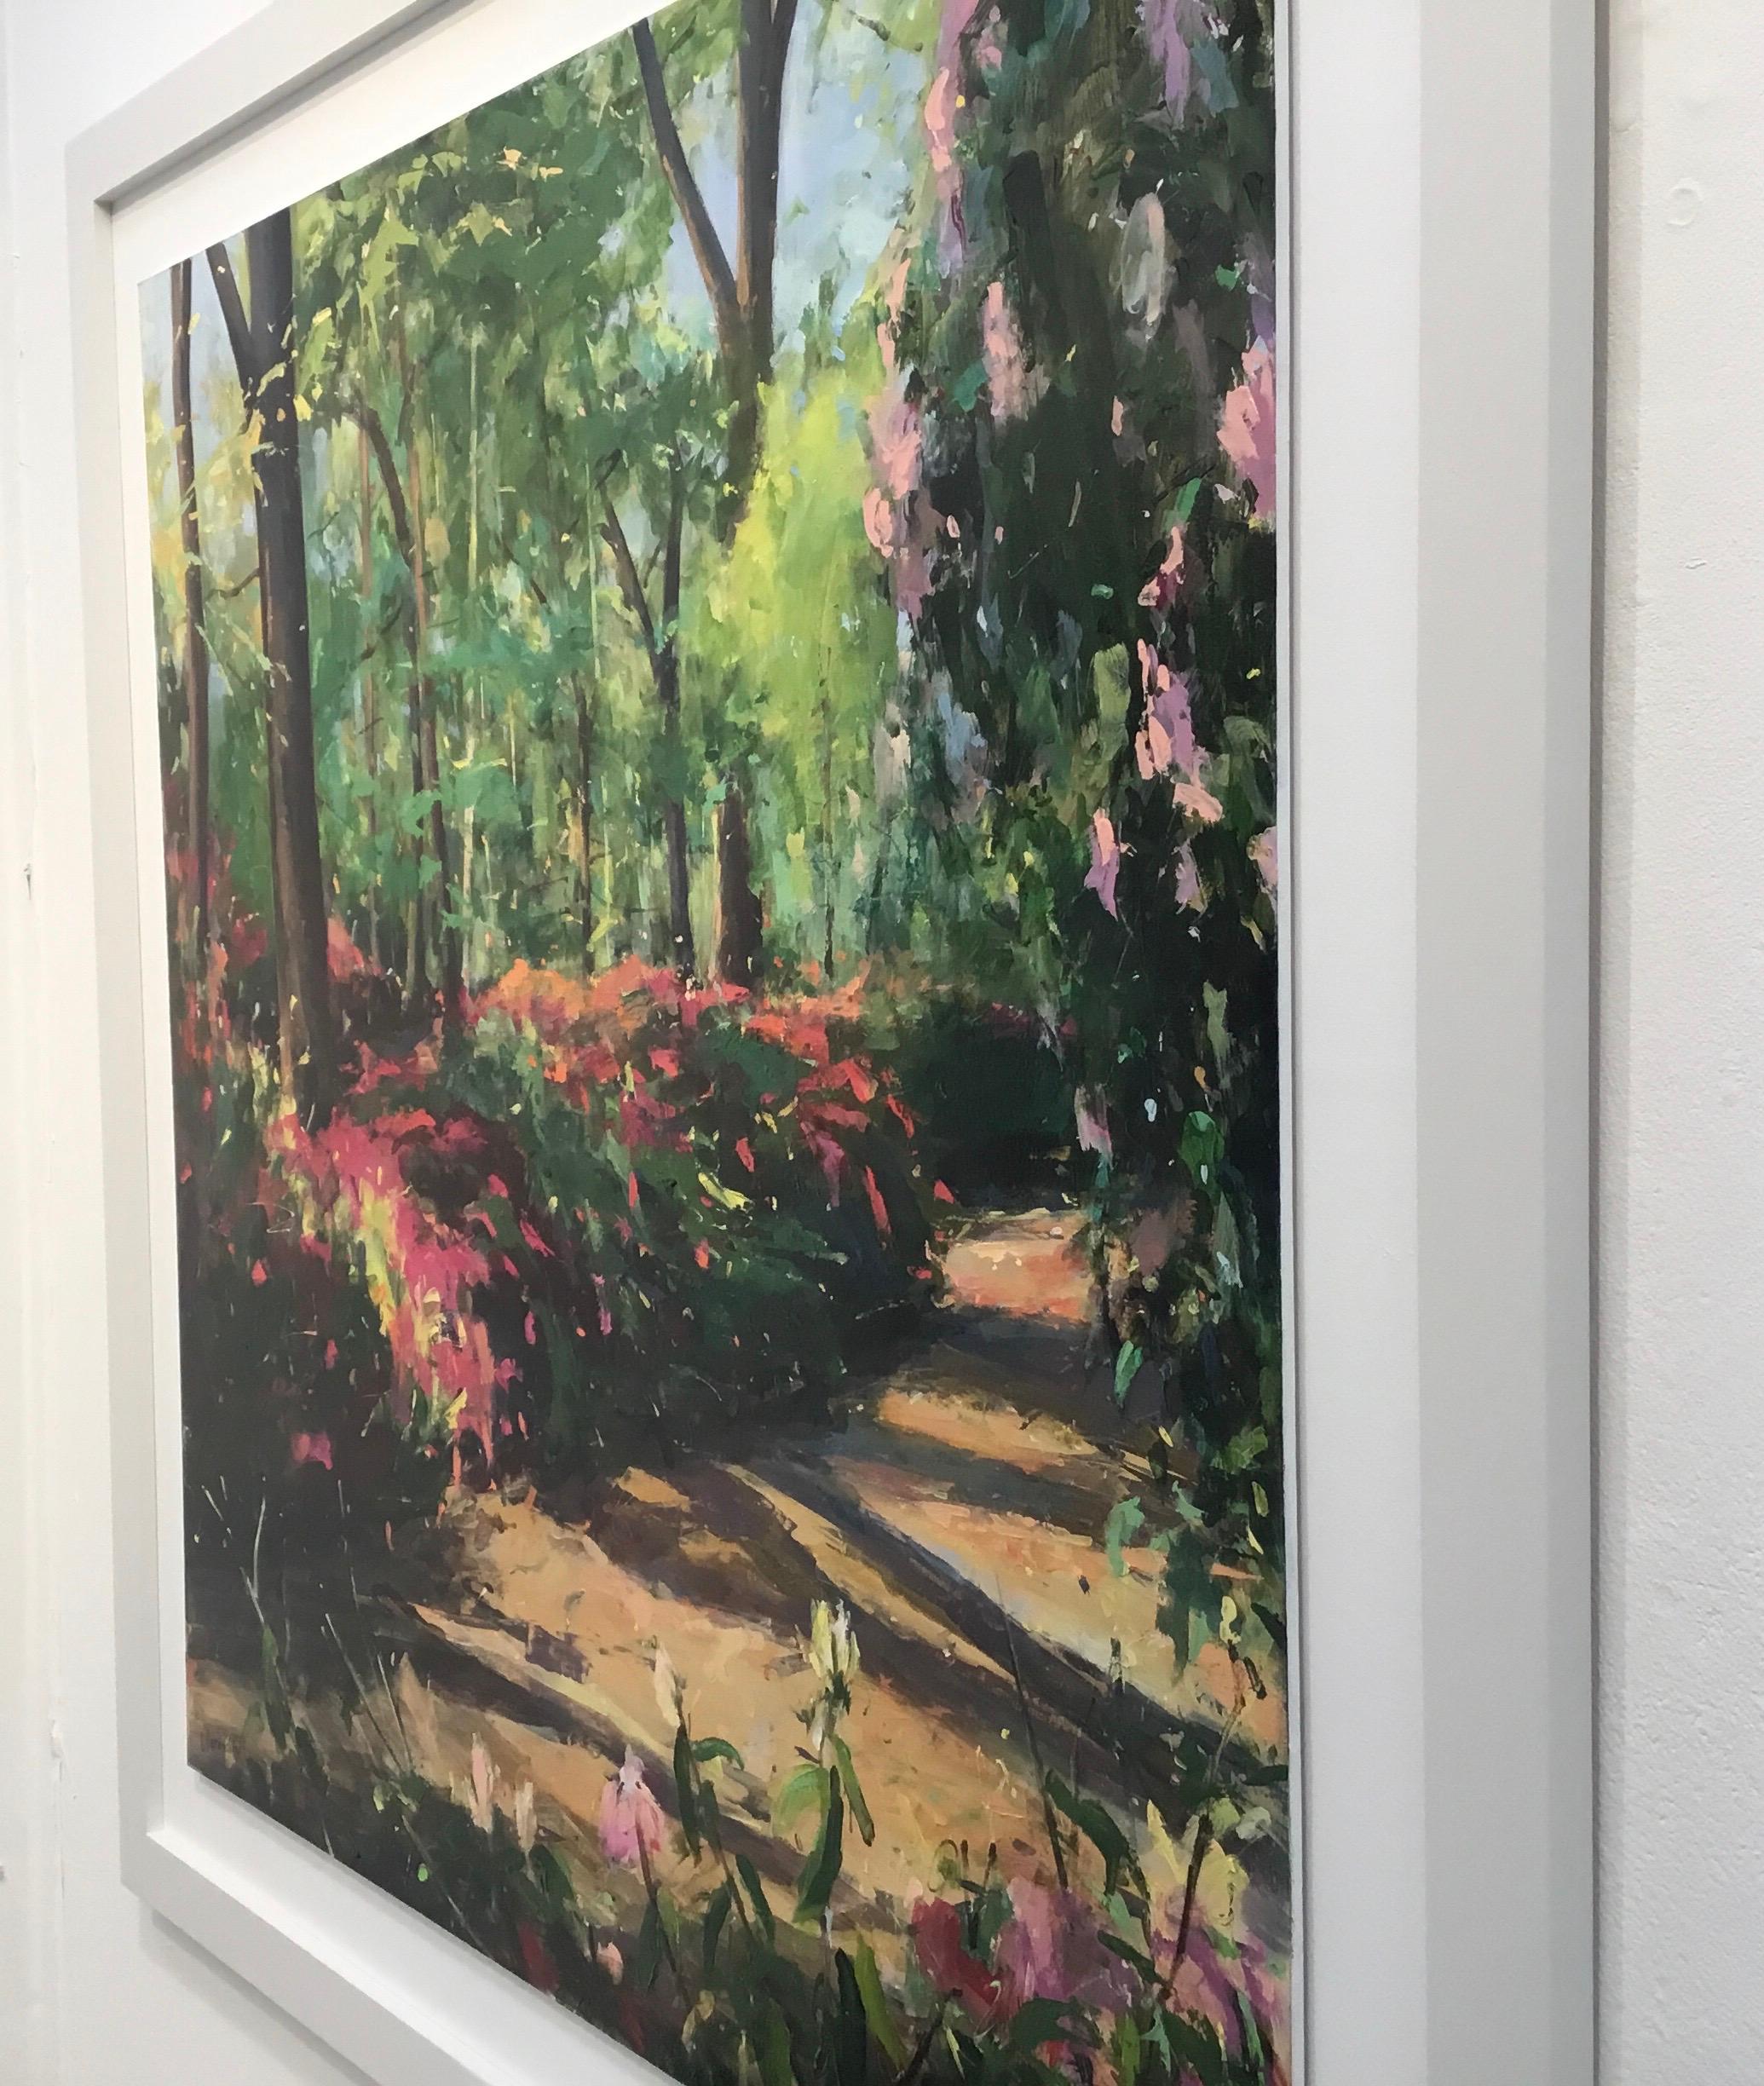 ‘A Message to You of Love’ is an original impressionistic painting in pink, red and green of a beautiful walk that I have done with my children every year as they grew up. This place in Richmond Park, London will always remind me of them and my